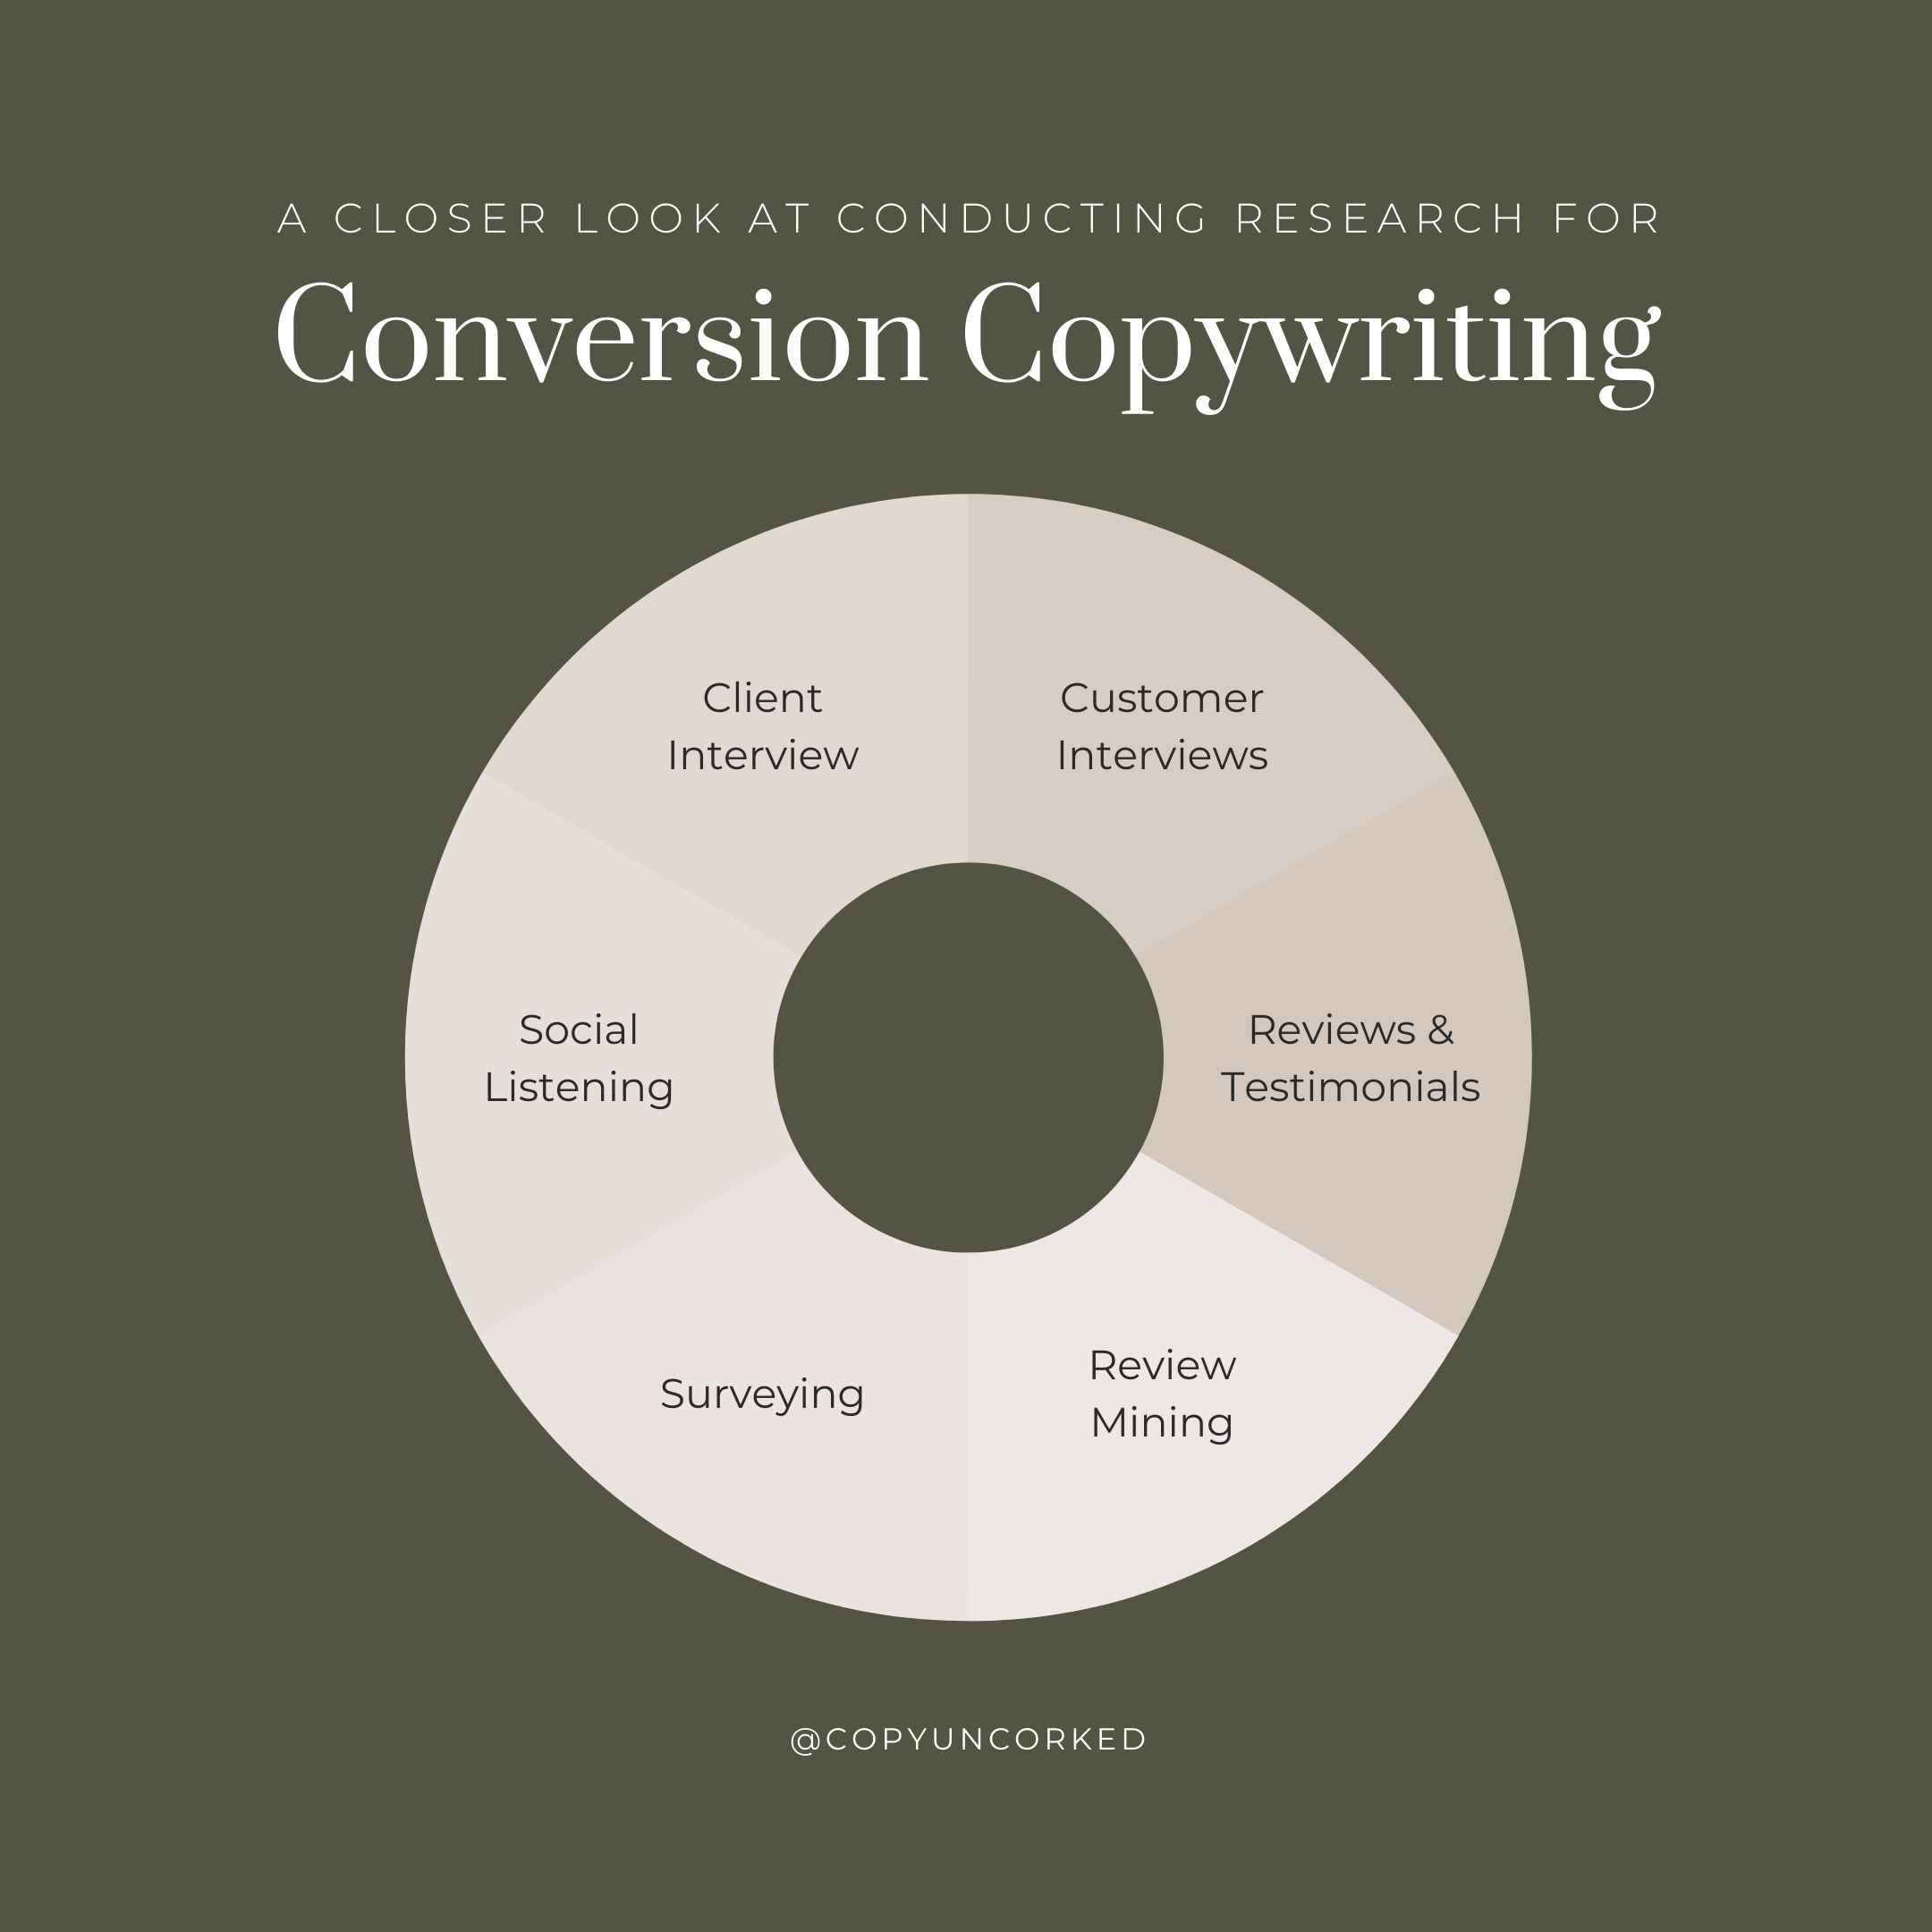 What is "Conversion Copywriting" & What "Research" is Really Involved? - copyuncorked.com/blog